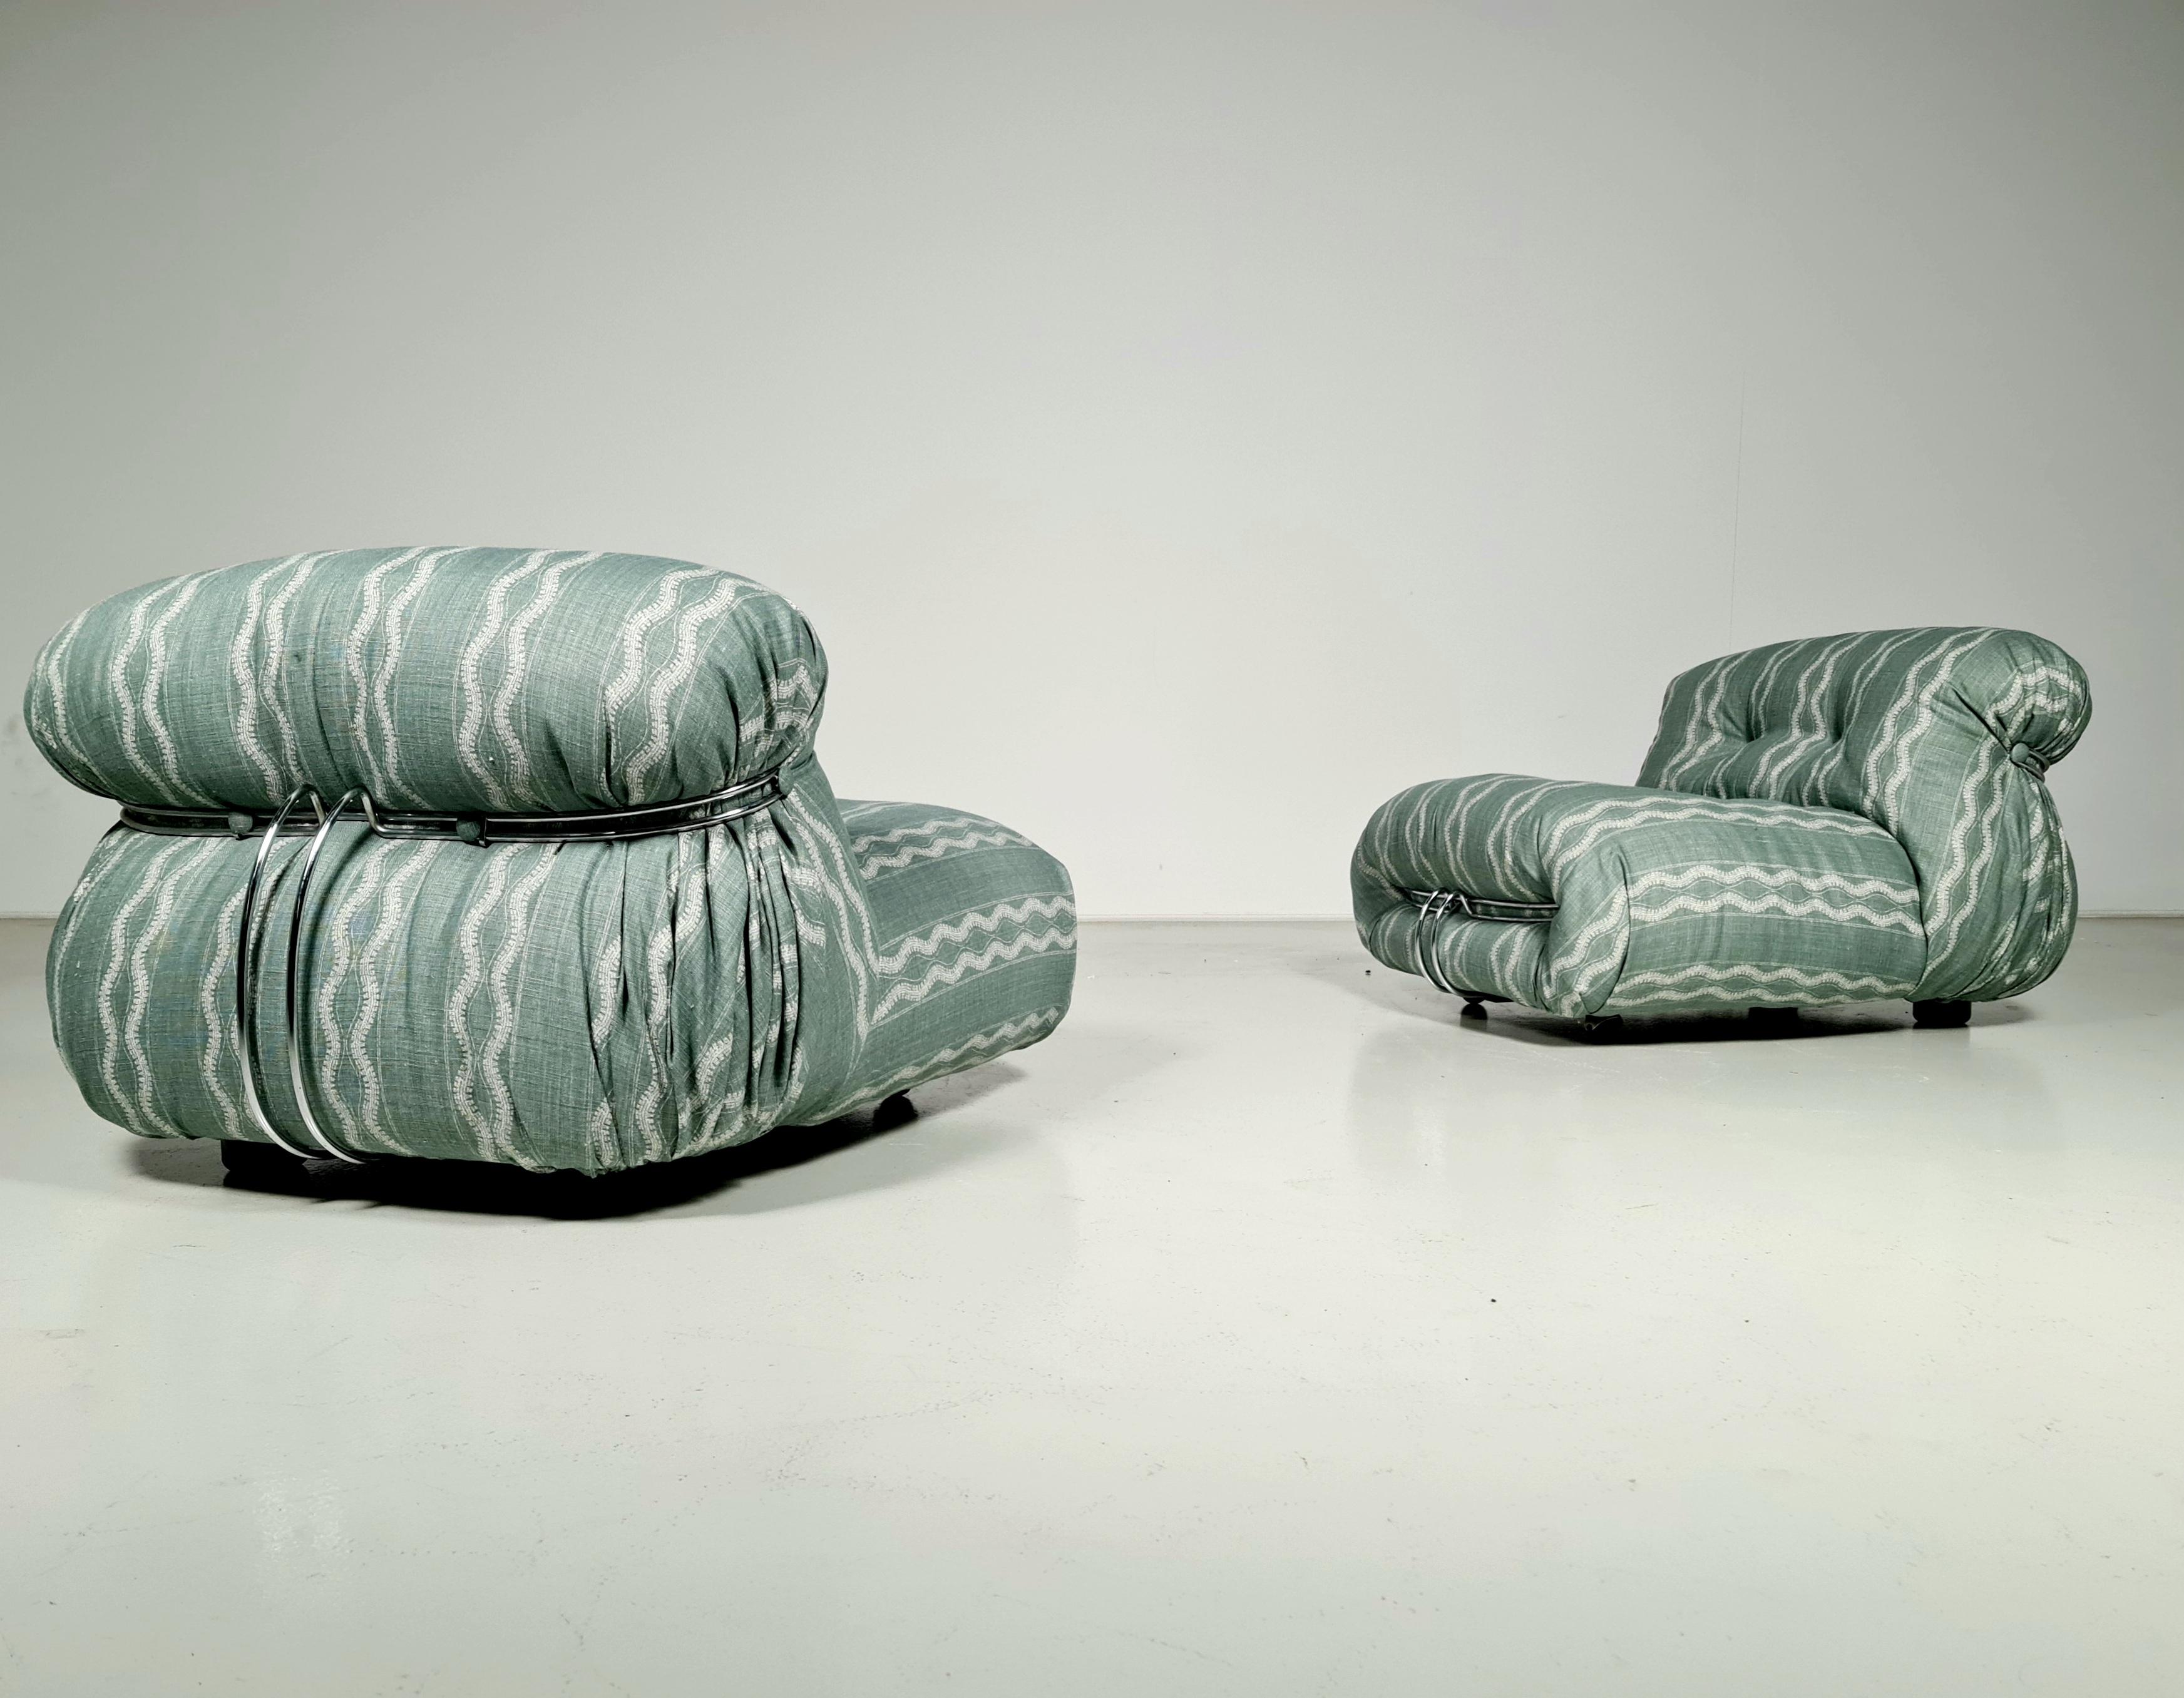 European Set of 2 Soriana Lounge Chairs by Afra & Tobia Scarpa for Cassina, 1970s